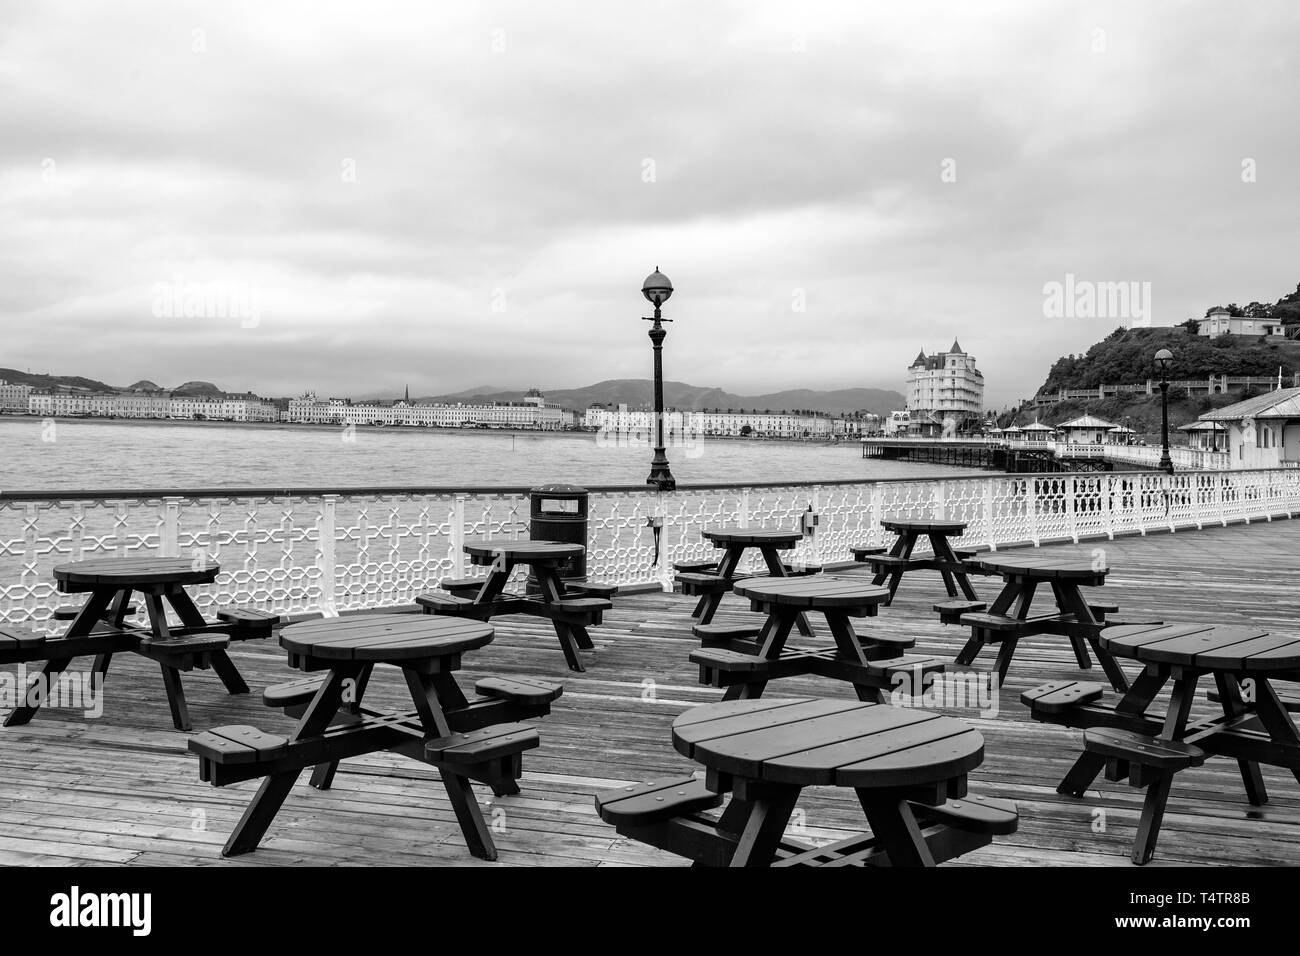 Looking towards Grand Hotel and Llandudno promenade from pier with empty seats in black and white, North Wales UK Stock Photo